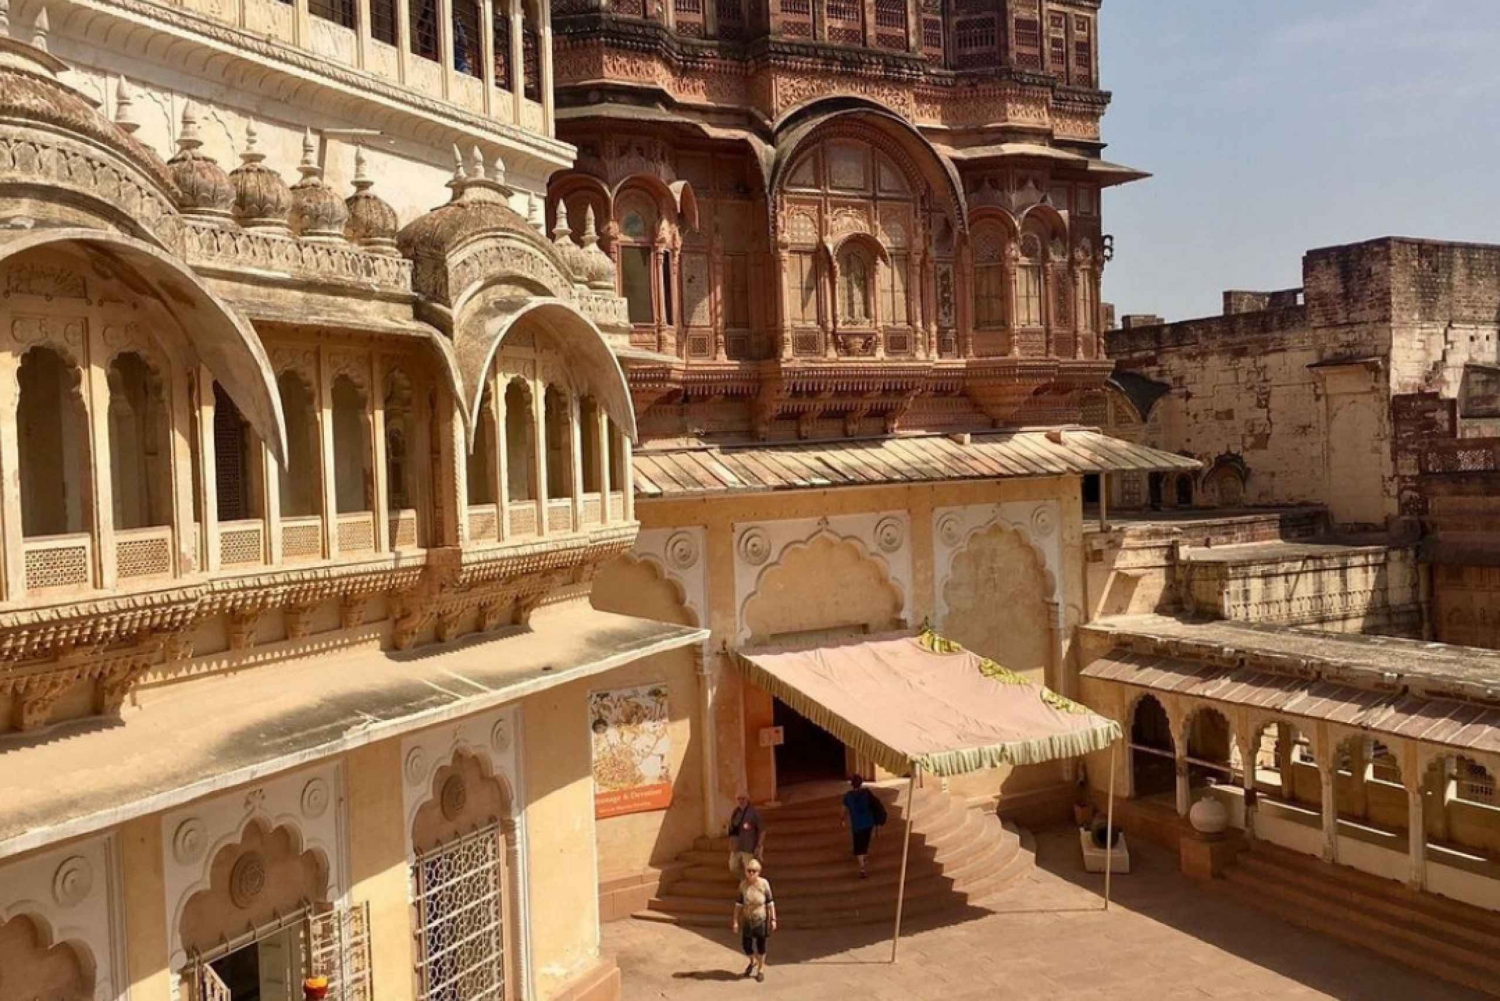 Jodhpur: Private Sightseeing Tour with Entry Tickets